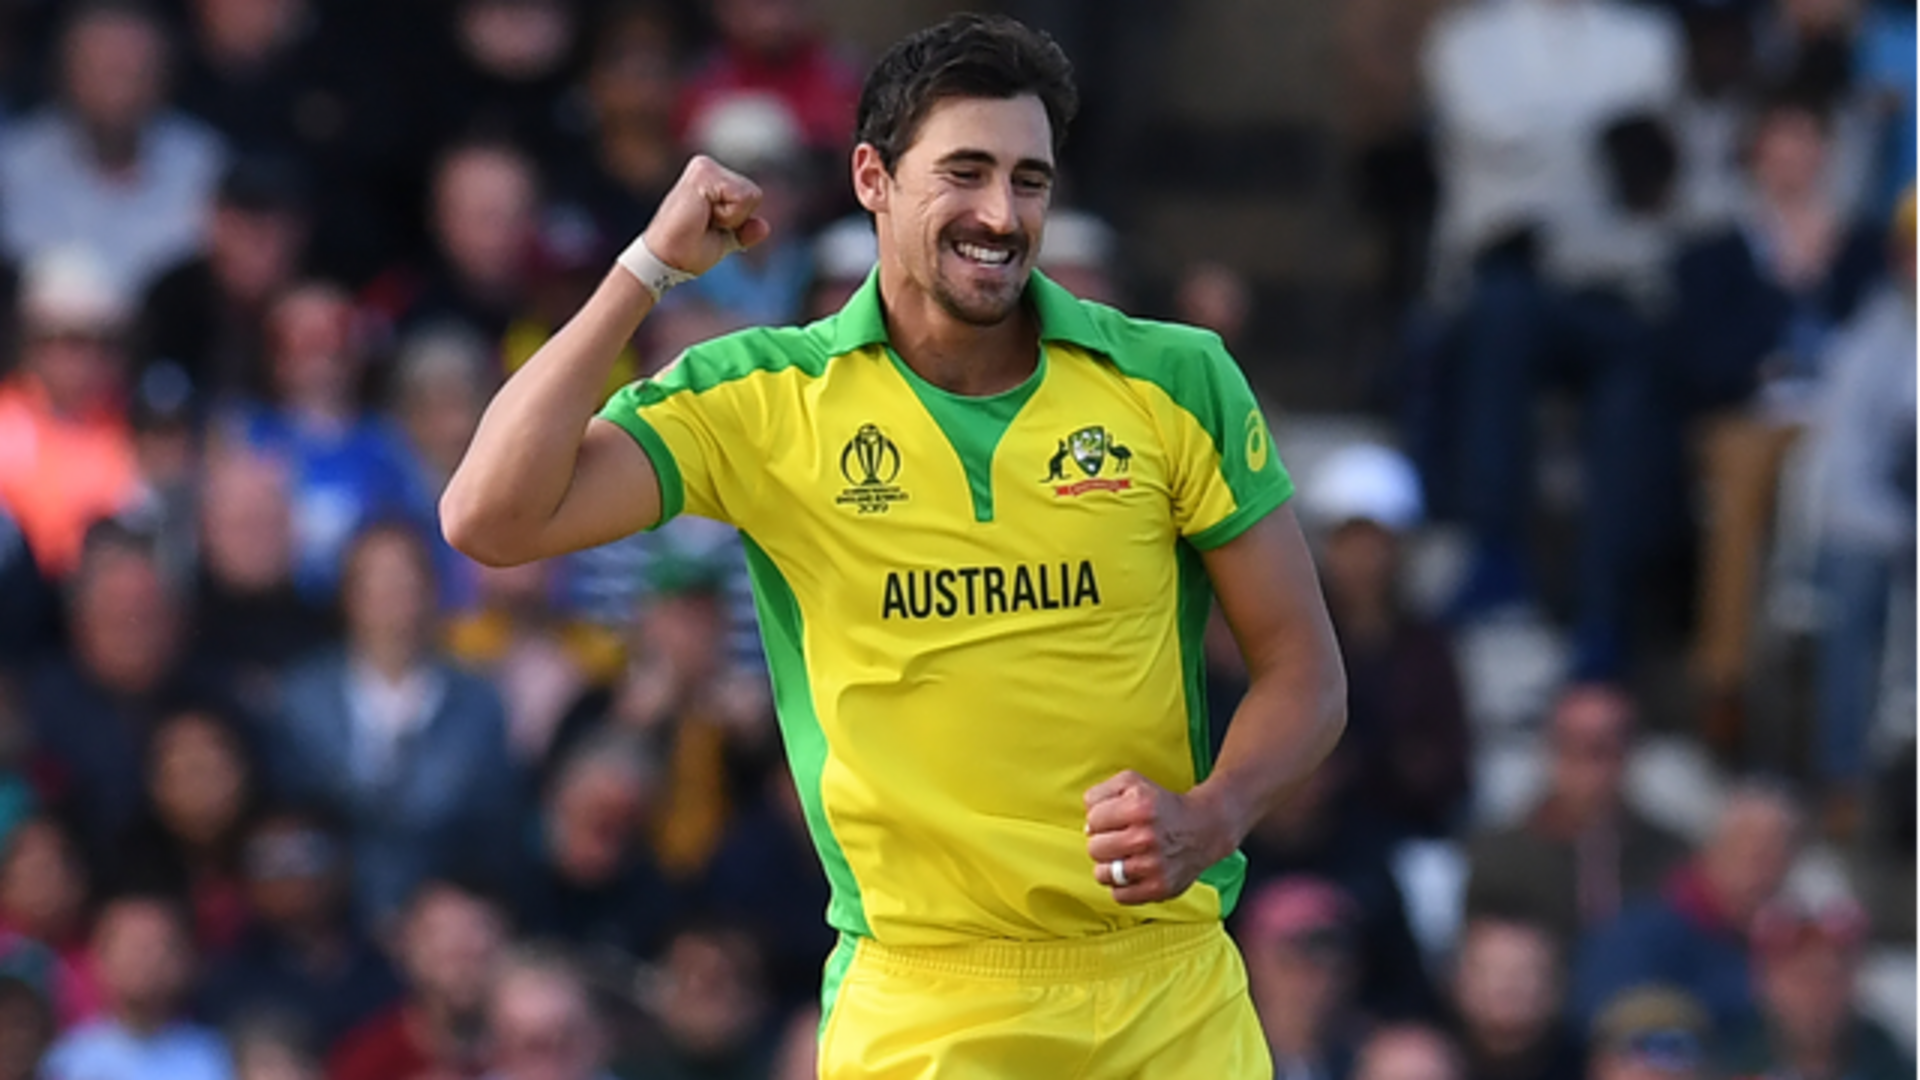 Mitchell Starc owns best bowling average in WC history: Stats